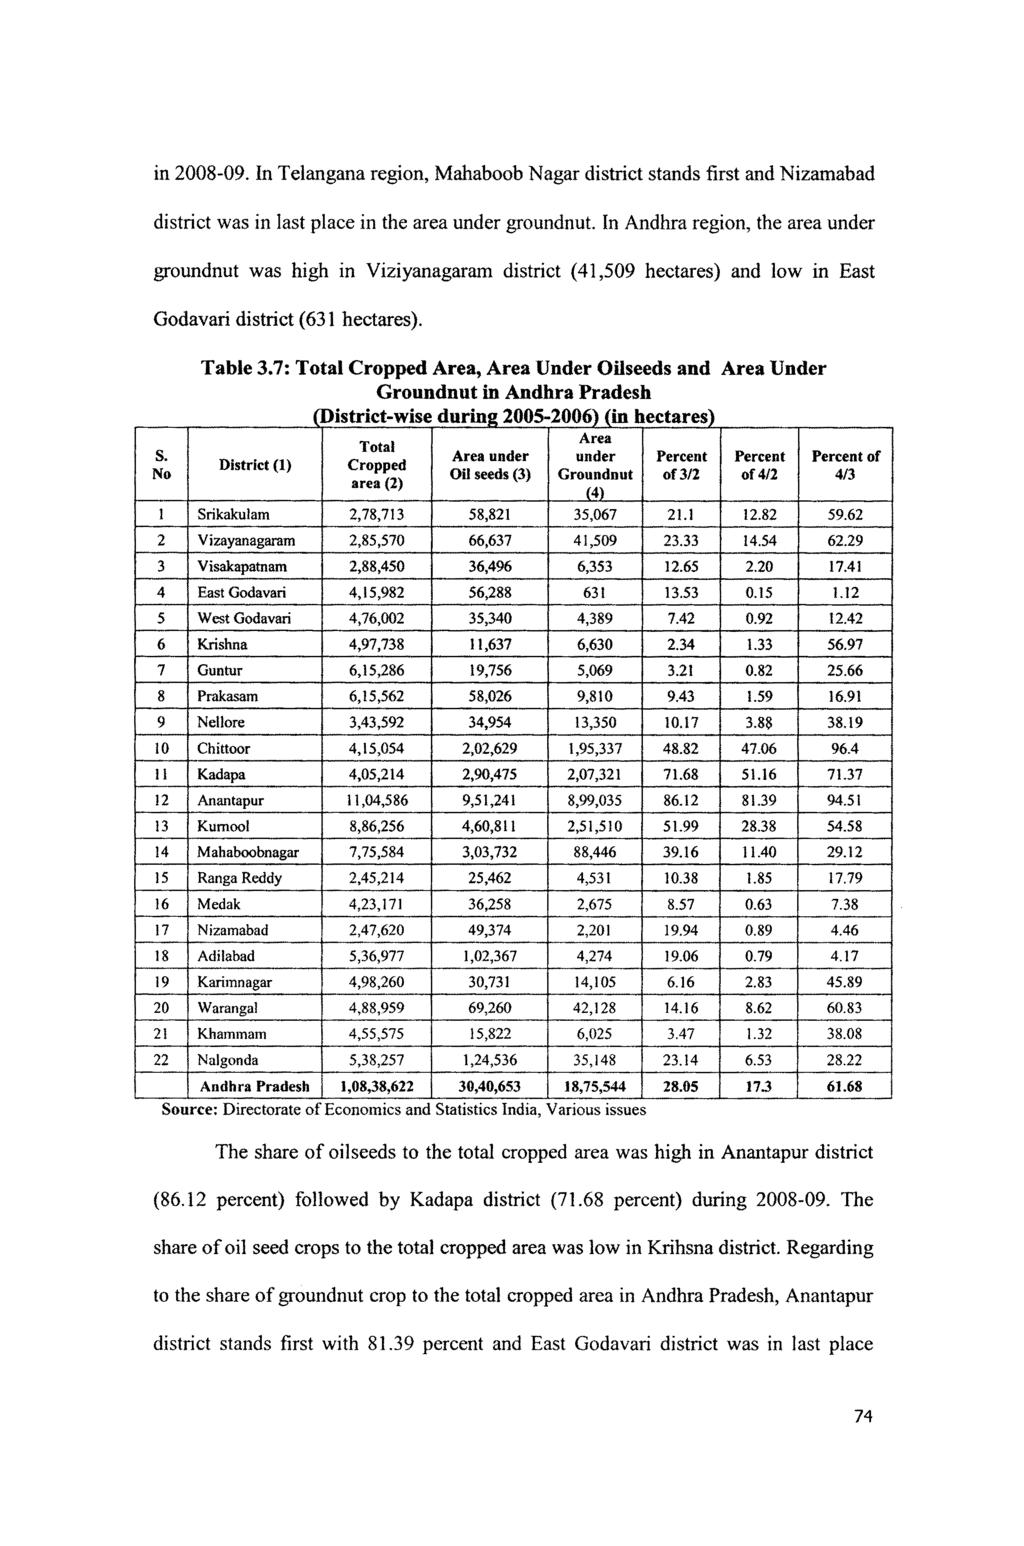 in 2008-09. In Telangana region, Mahaboob Nagar district stands first and Nizamabad district was in last place in the area under groundnut.